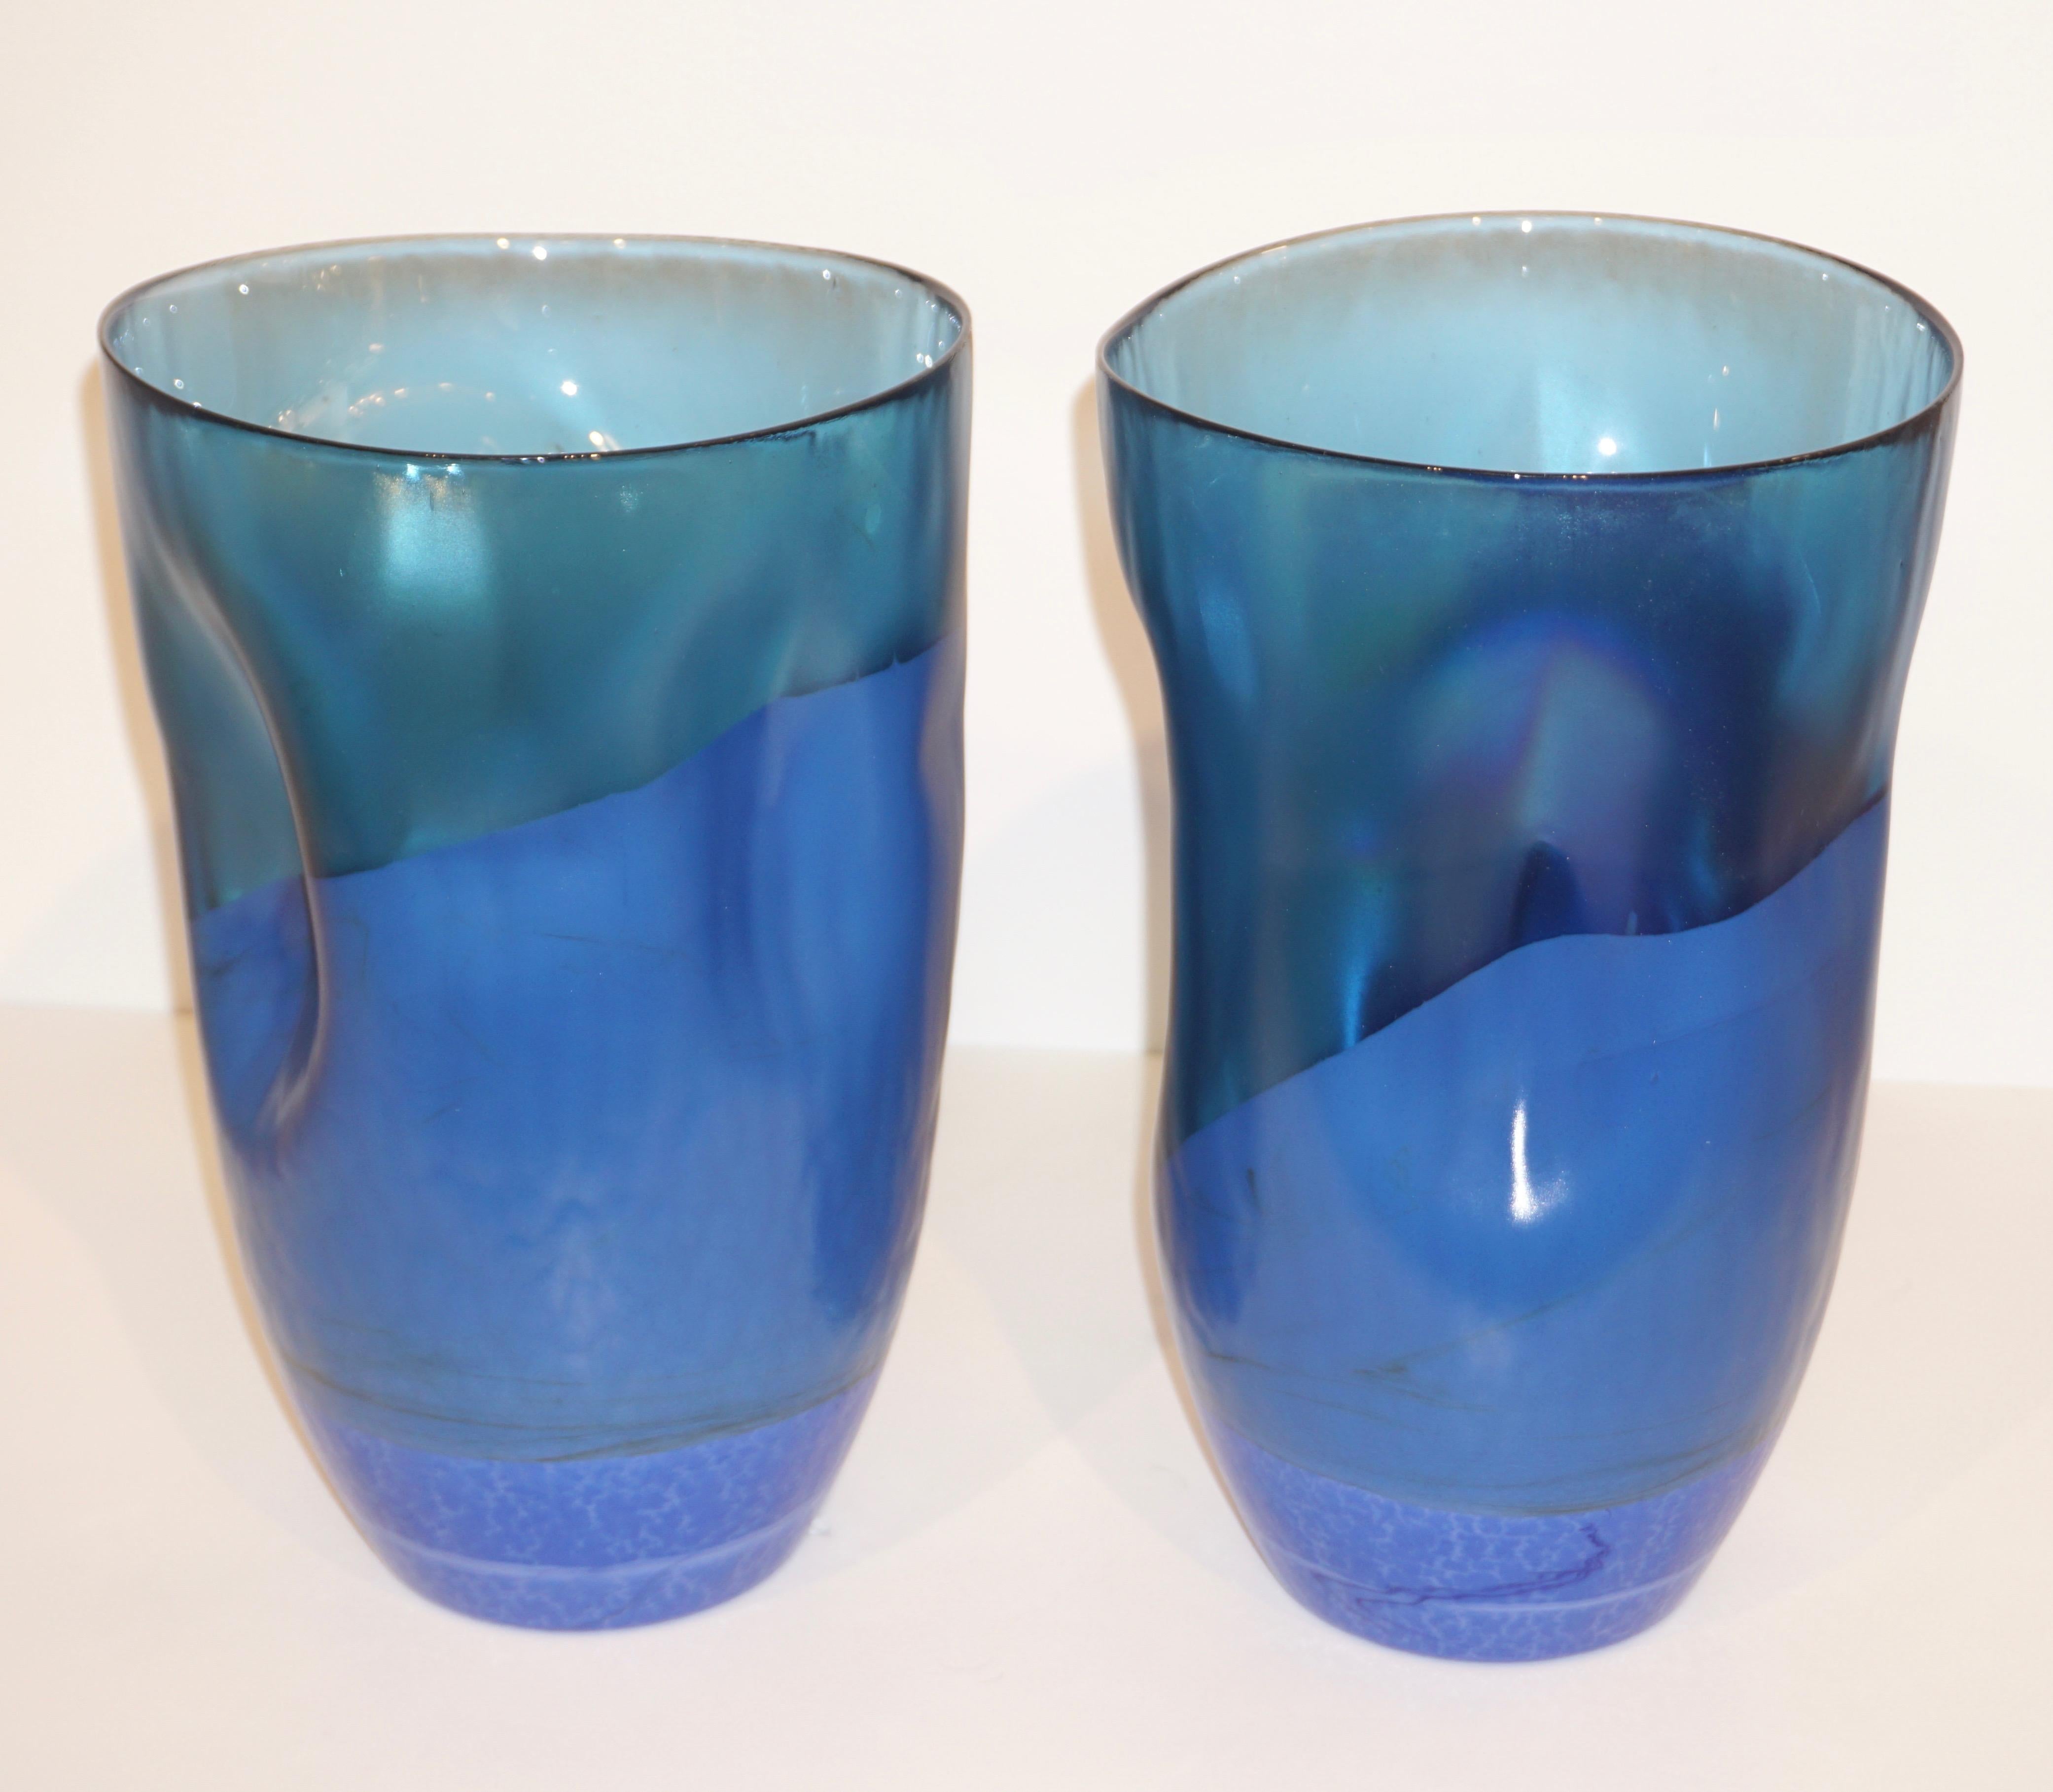 Contemporary Minimalist Iridiscent Royal Blue Murano Glass Pair of Modern Vases For Sale 4